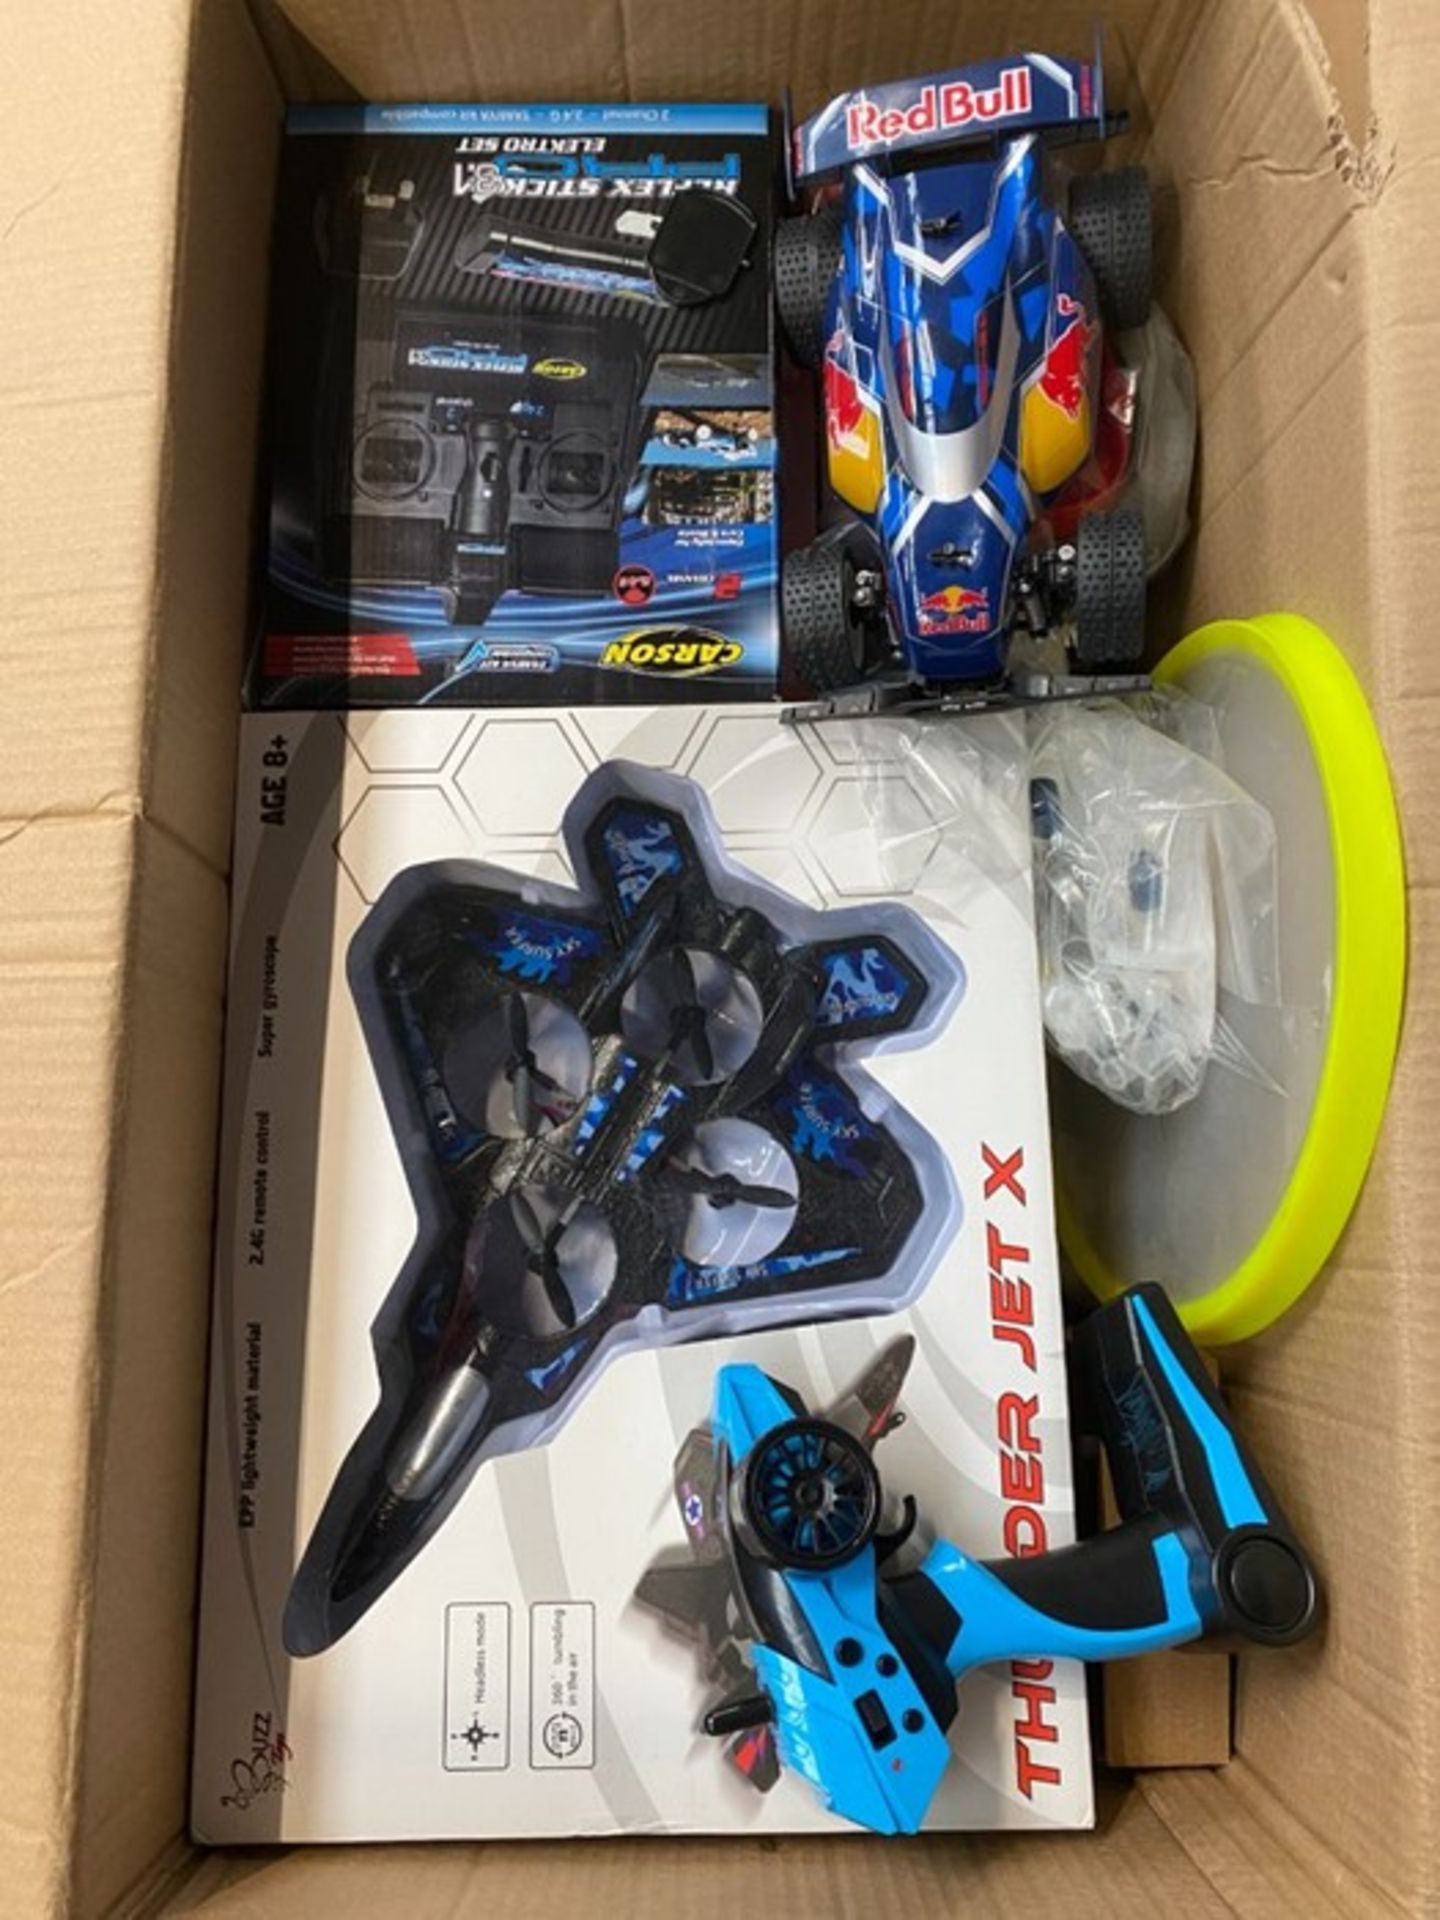 ONE LOT TO CONTAIN AN ASSORTMENT OF TOYS (CUSTOMER RETURNS UNTESTED BY DMR)